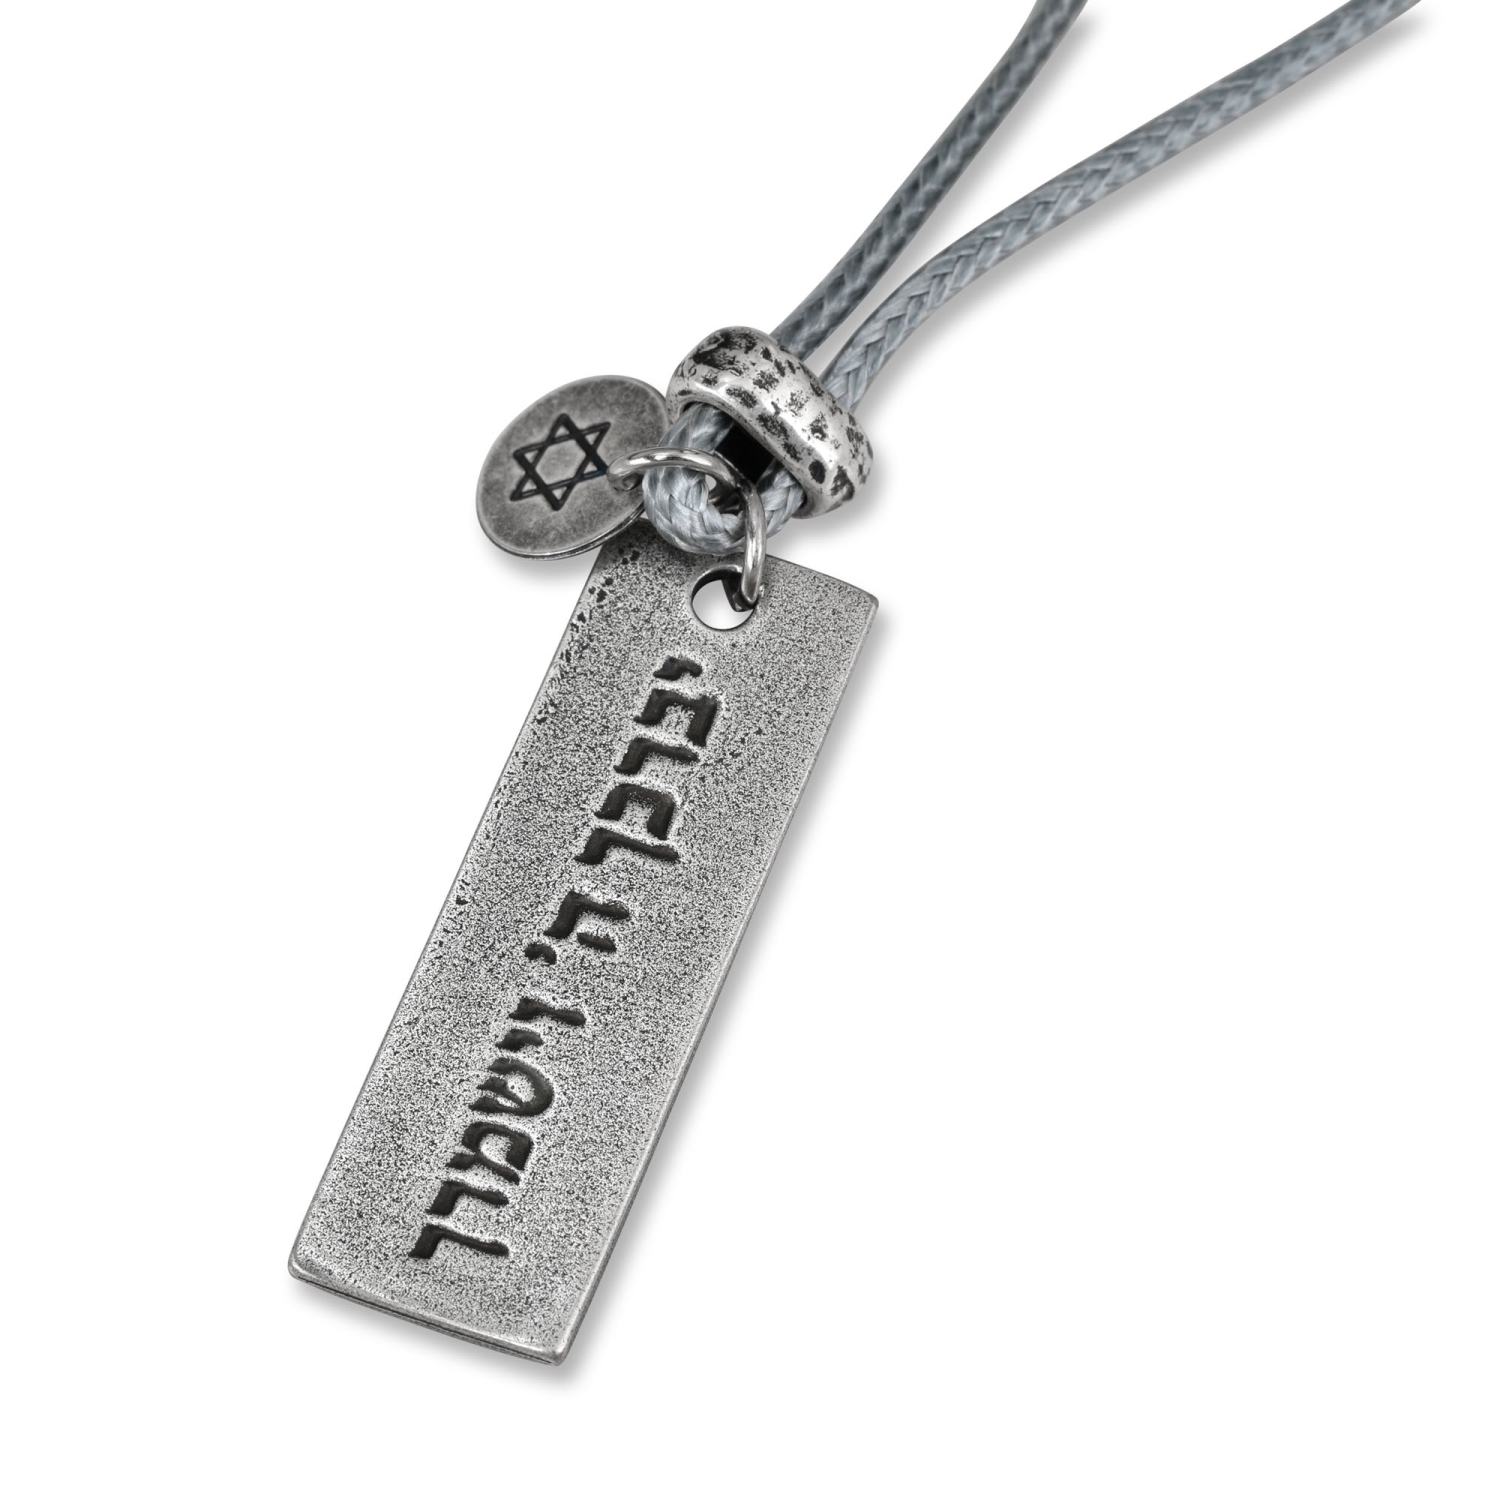 Galis Jewelry Silver Plated Priestly Blessing Dog Tag Men's Necklace with Gray Cord - 3